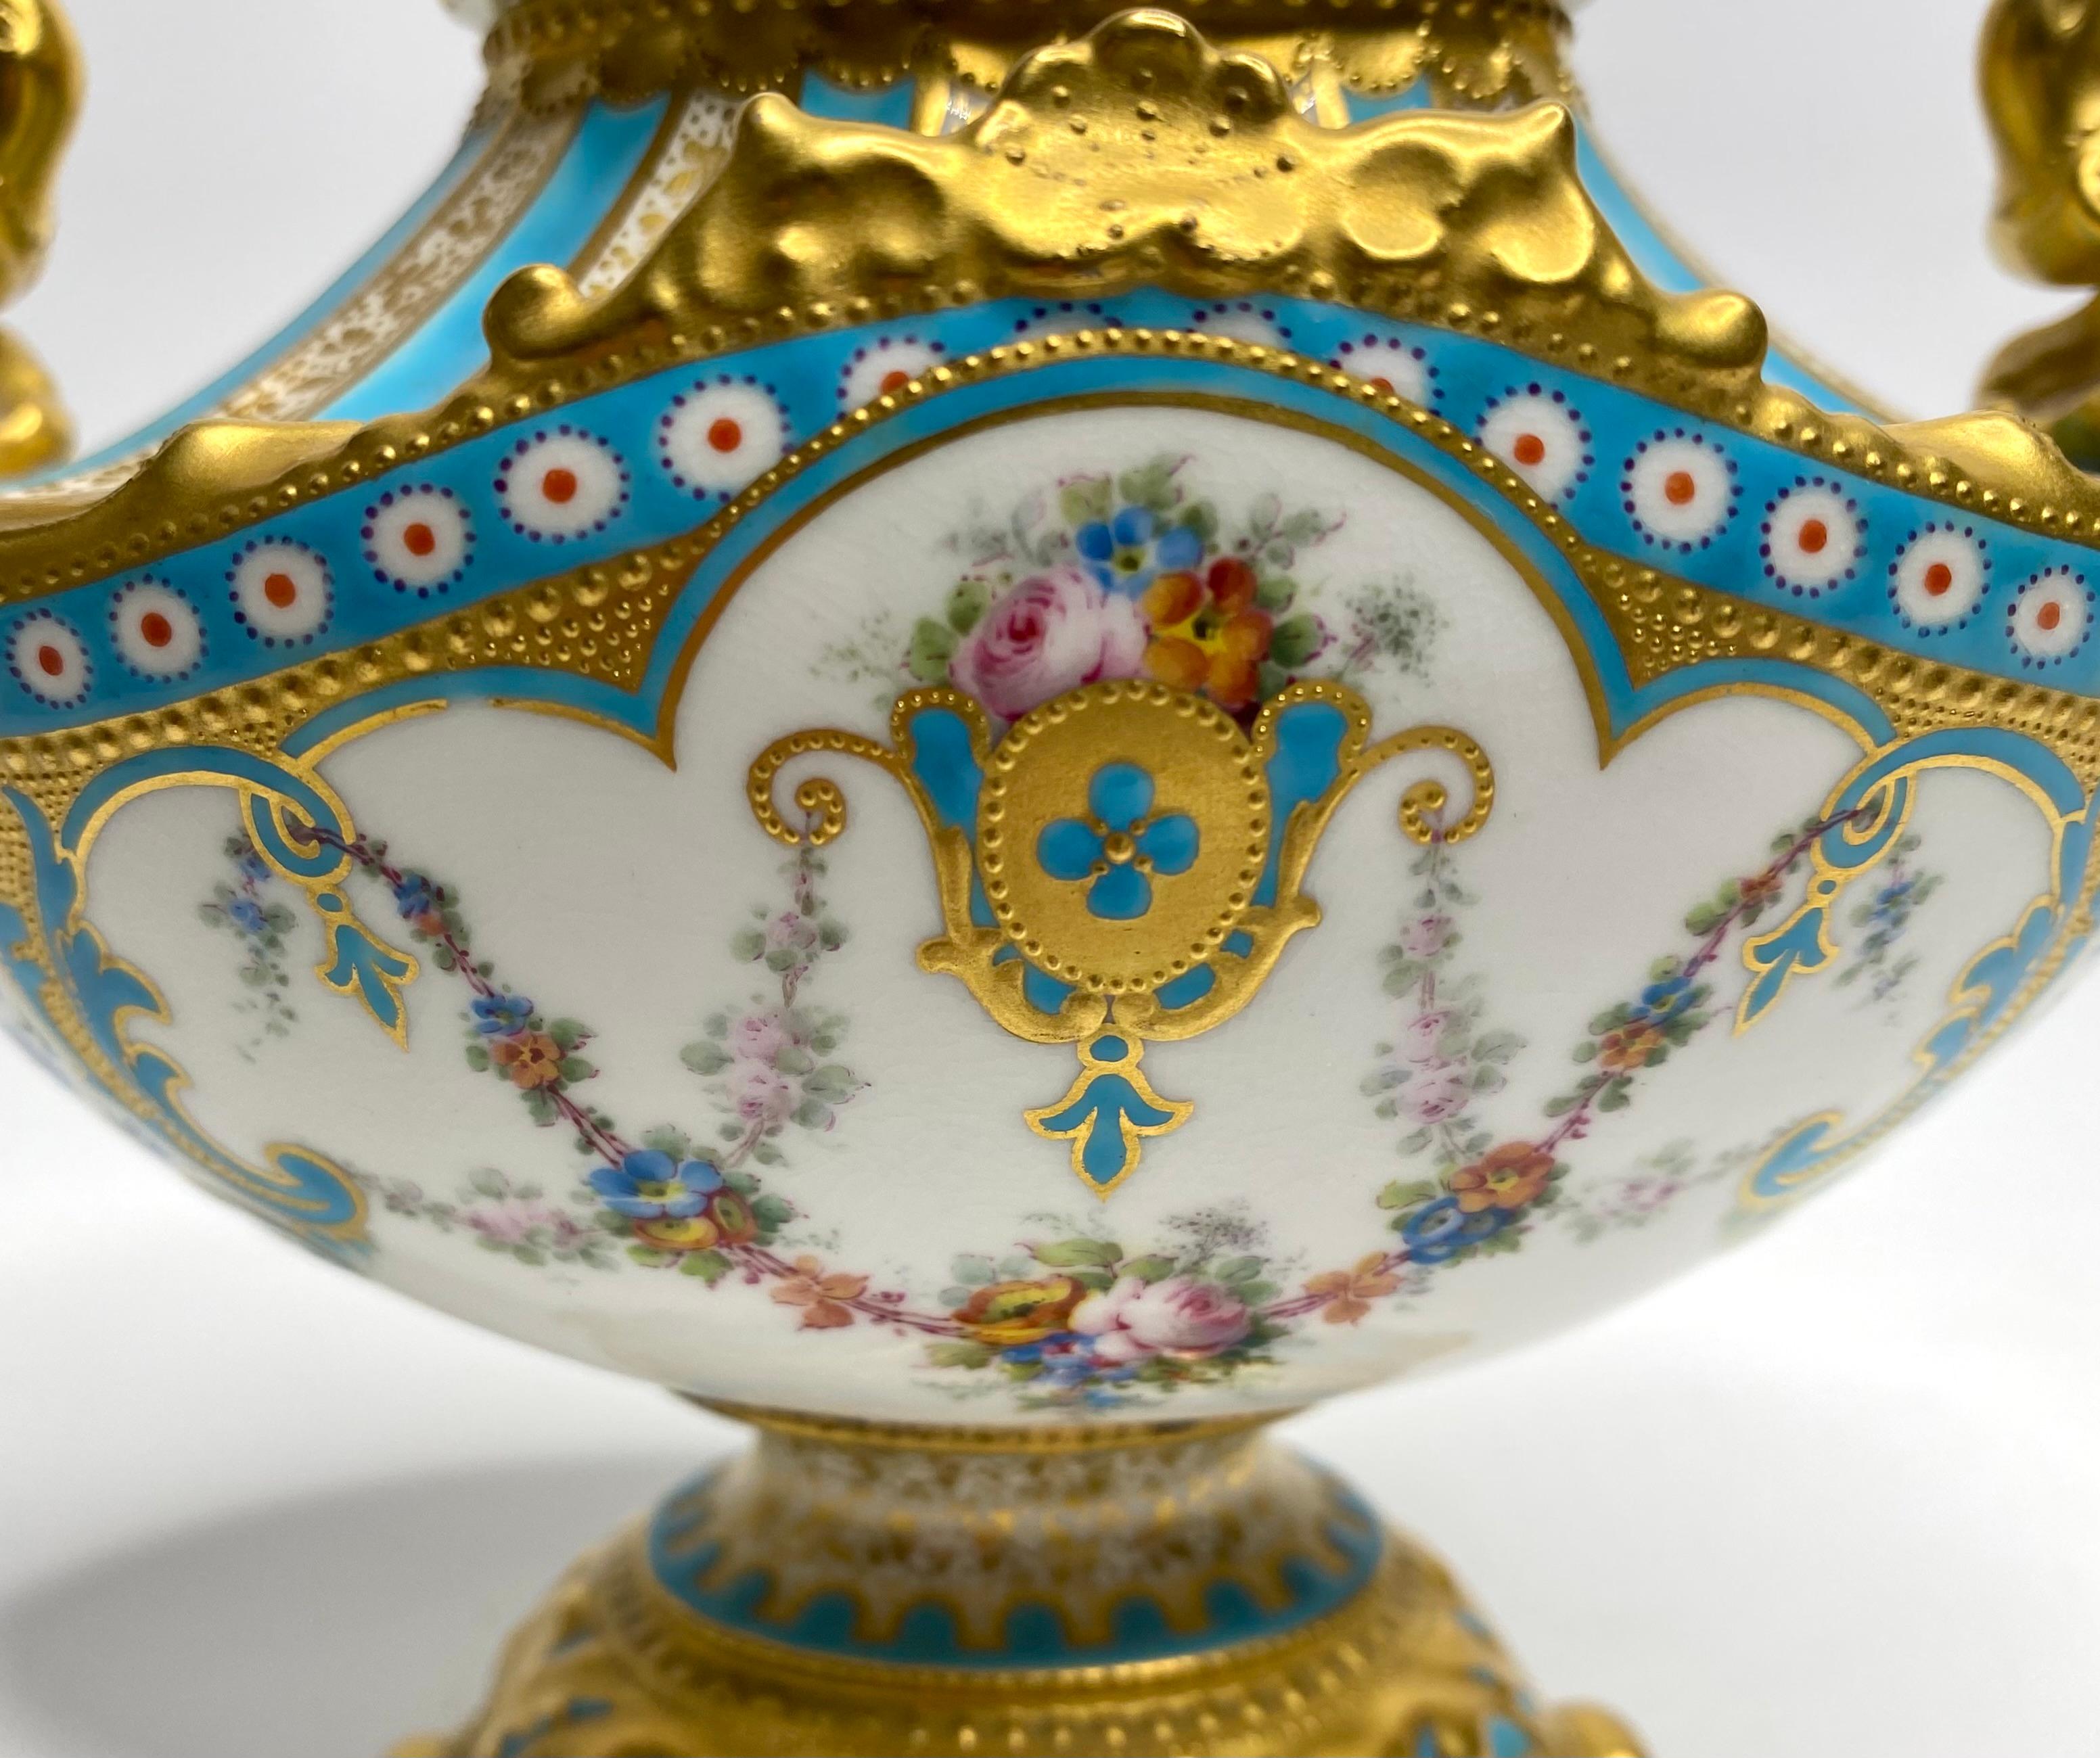 Fired Royal Crown Derby porcelain vase and cover. Desire Leroy, d. 1897. For Sale